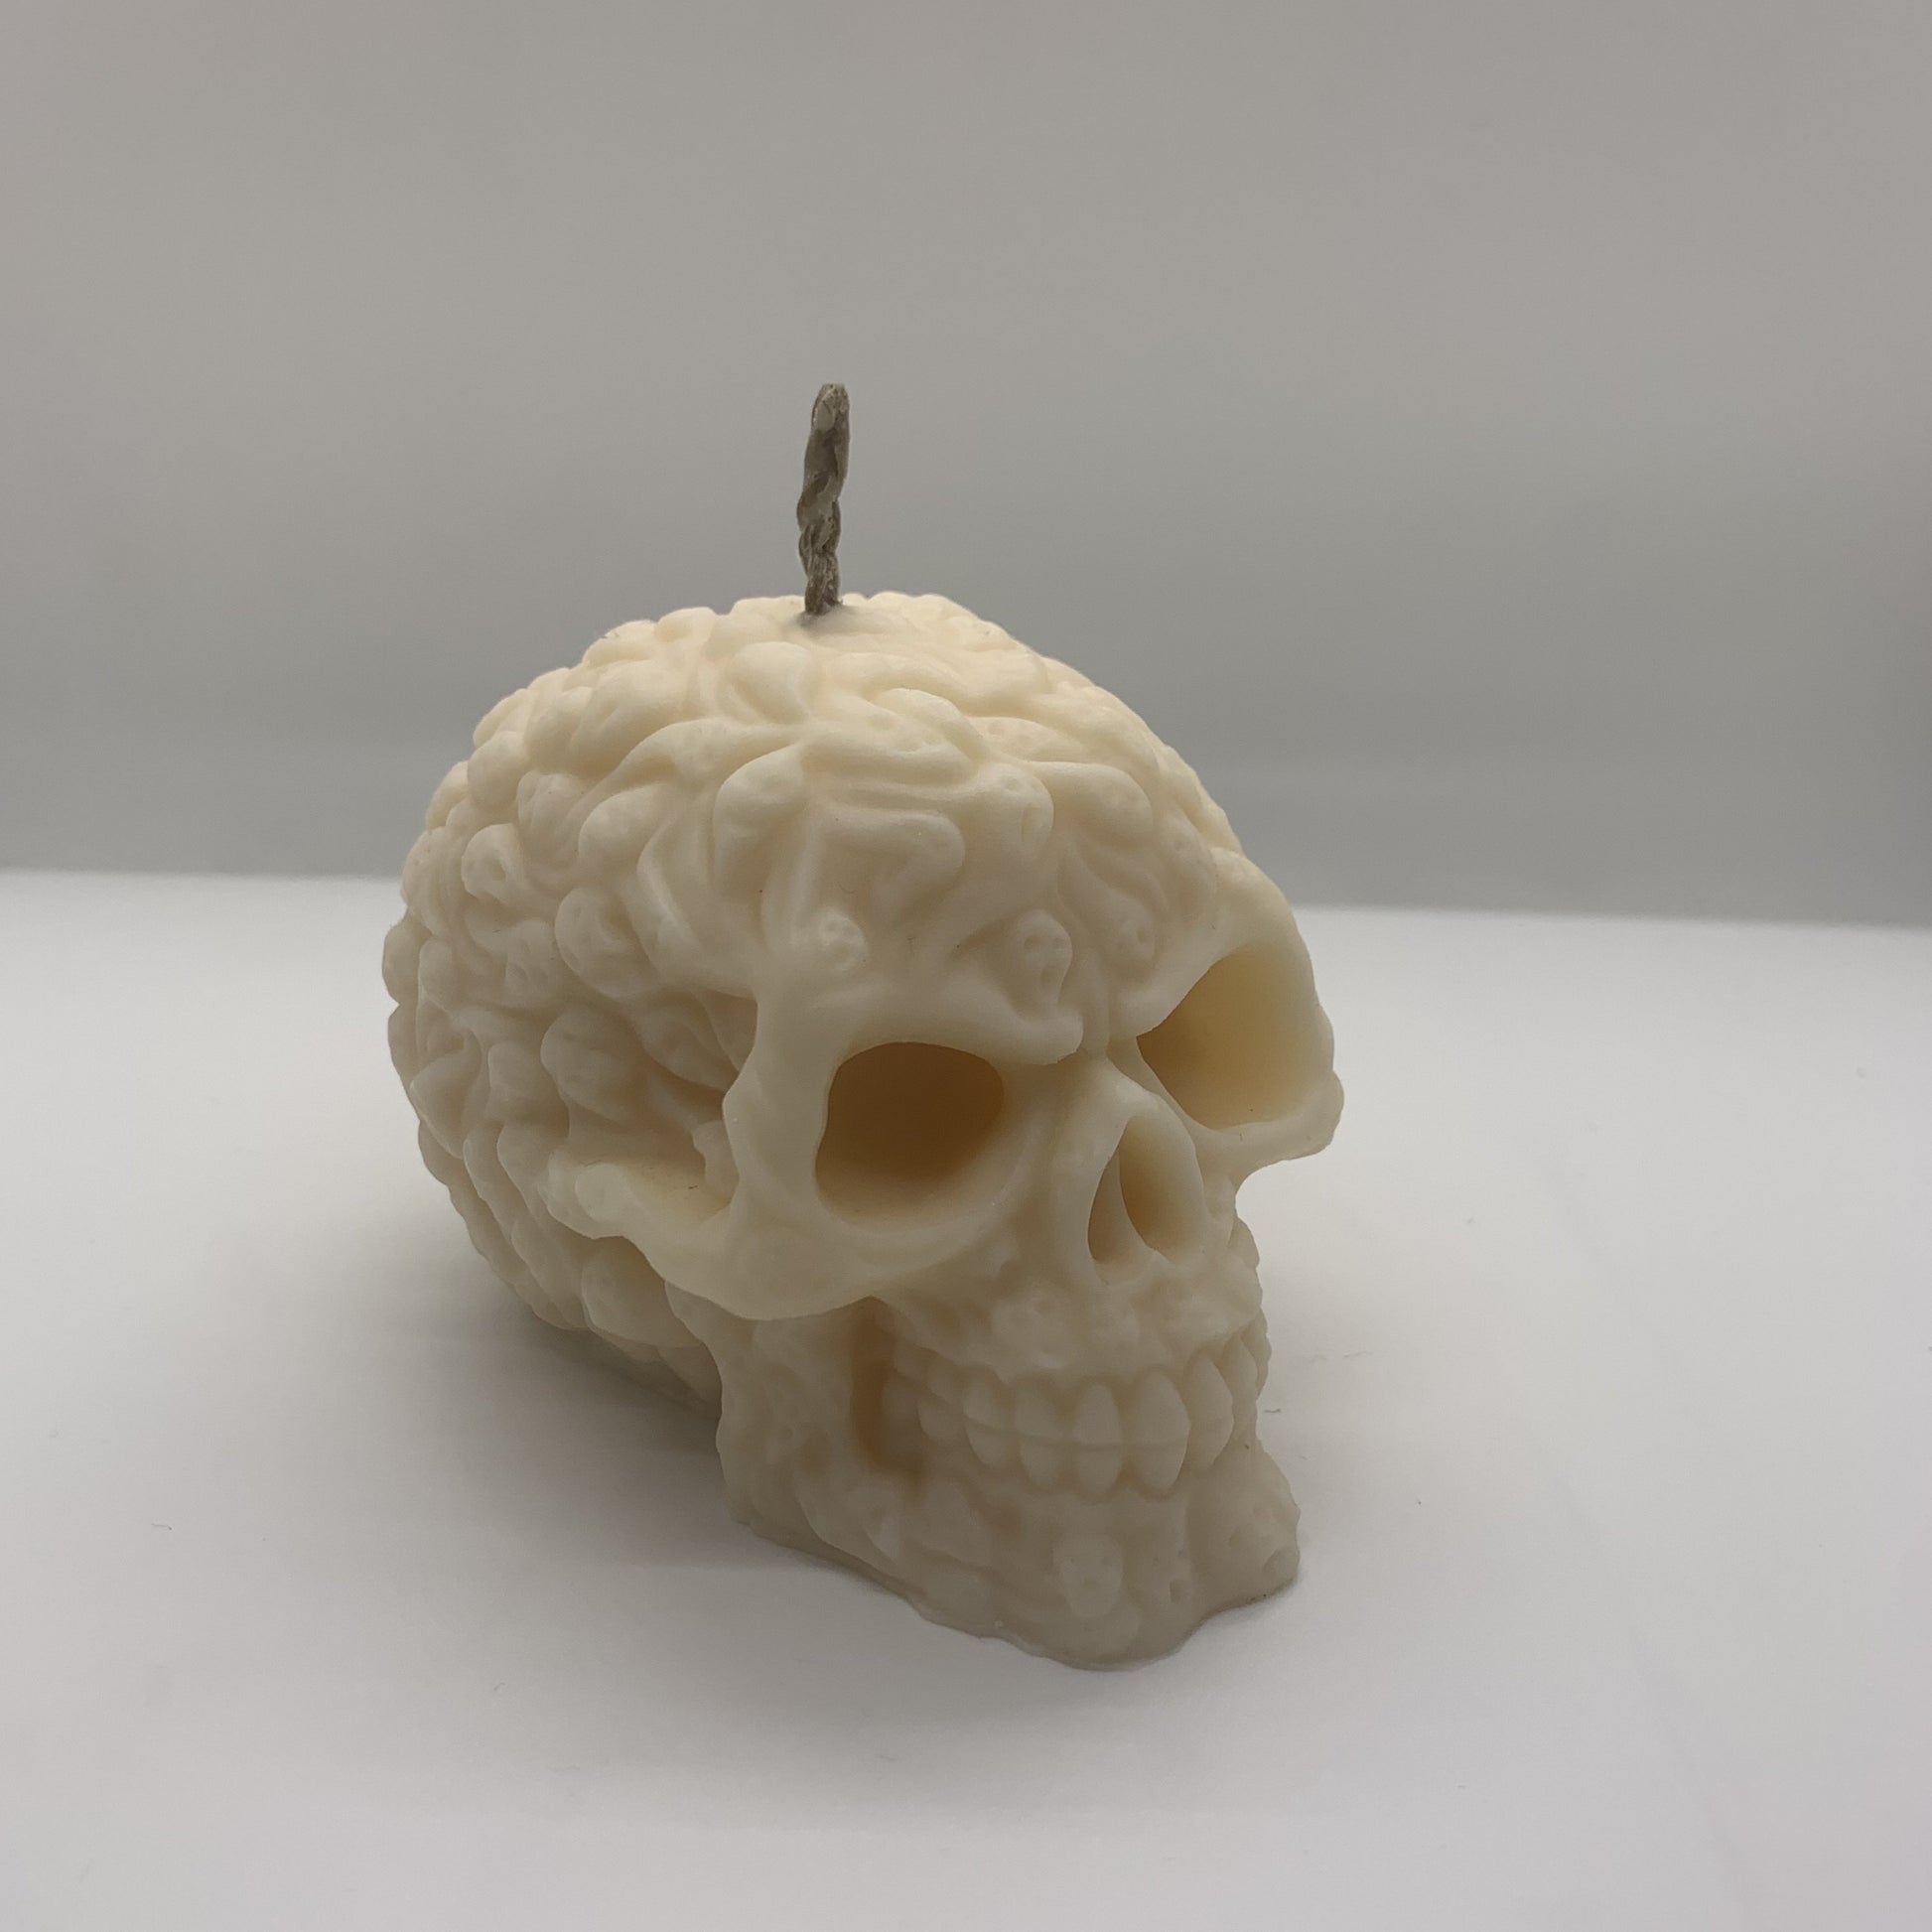 The Skull of Spirits Candle – Repose Comforts